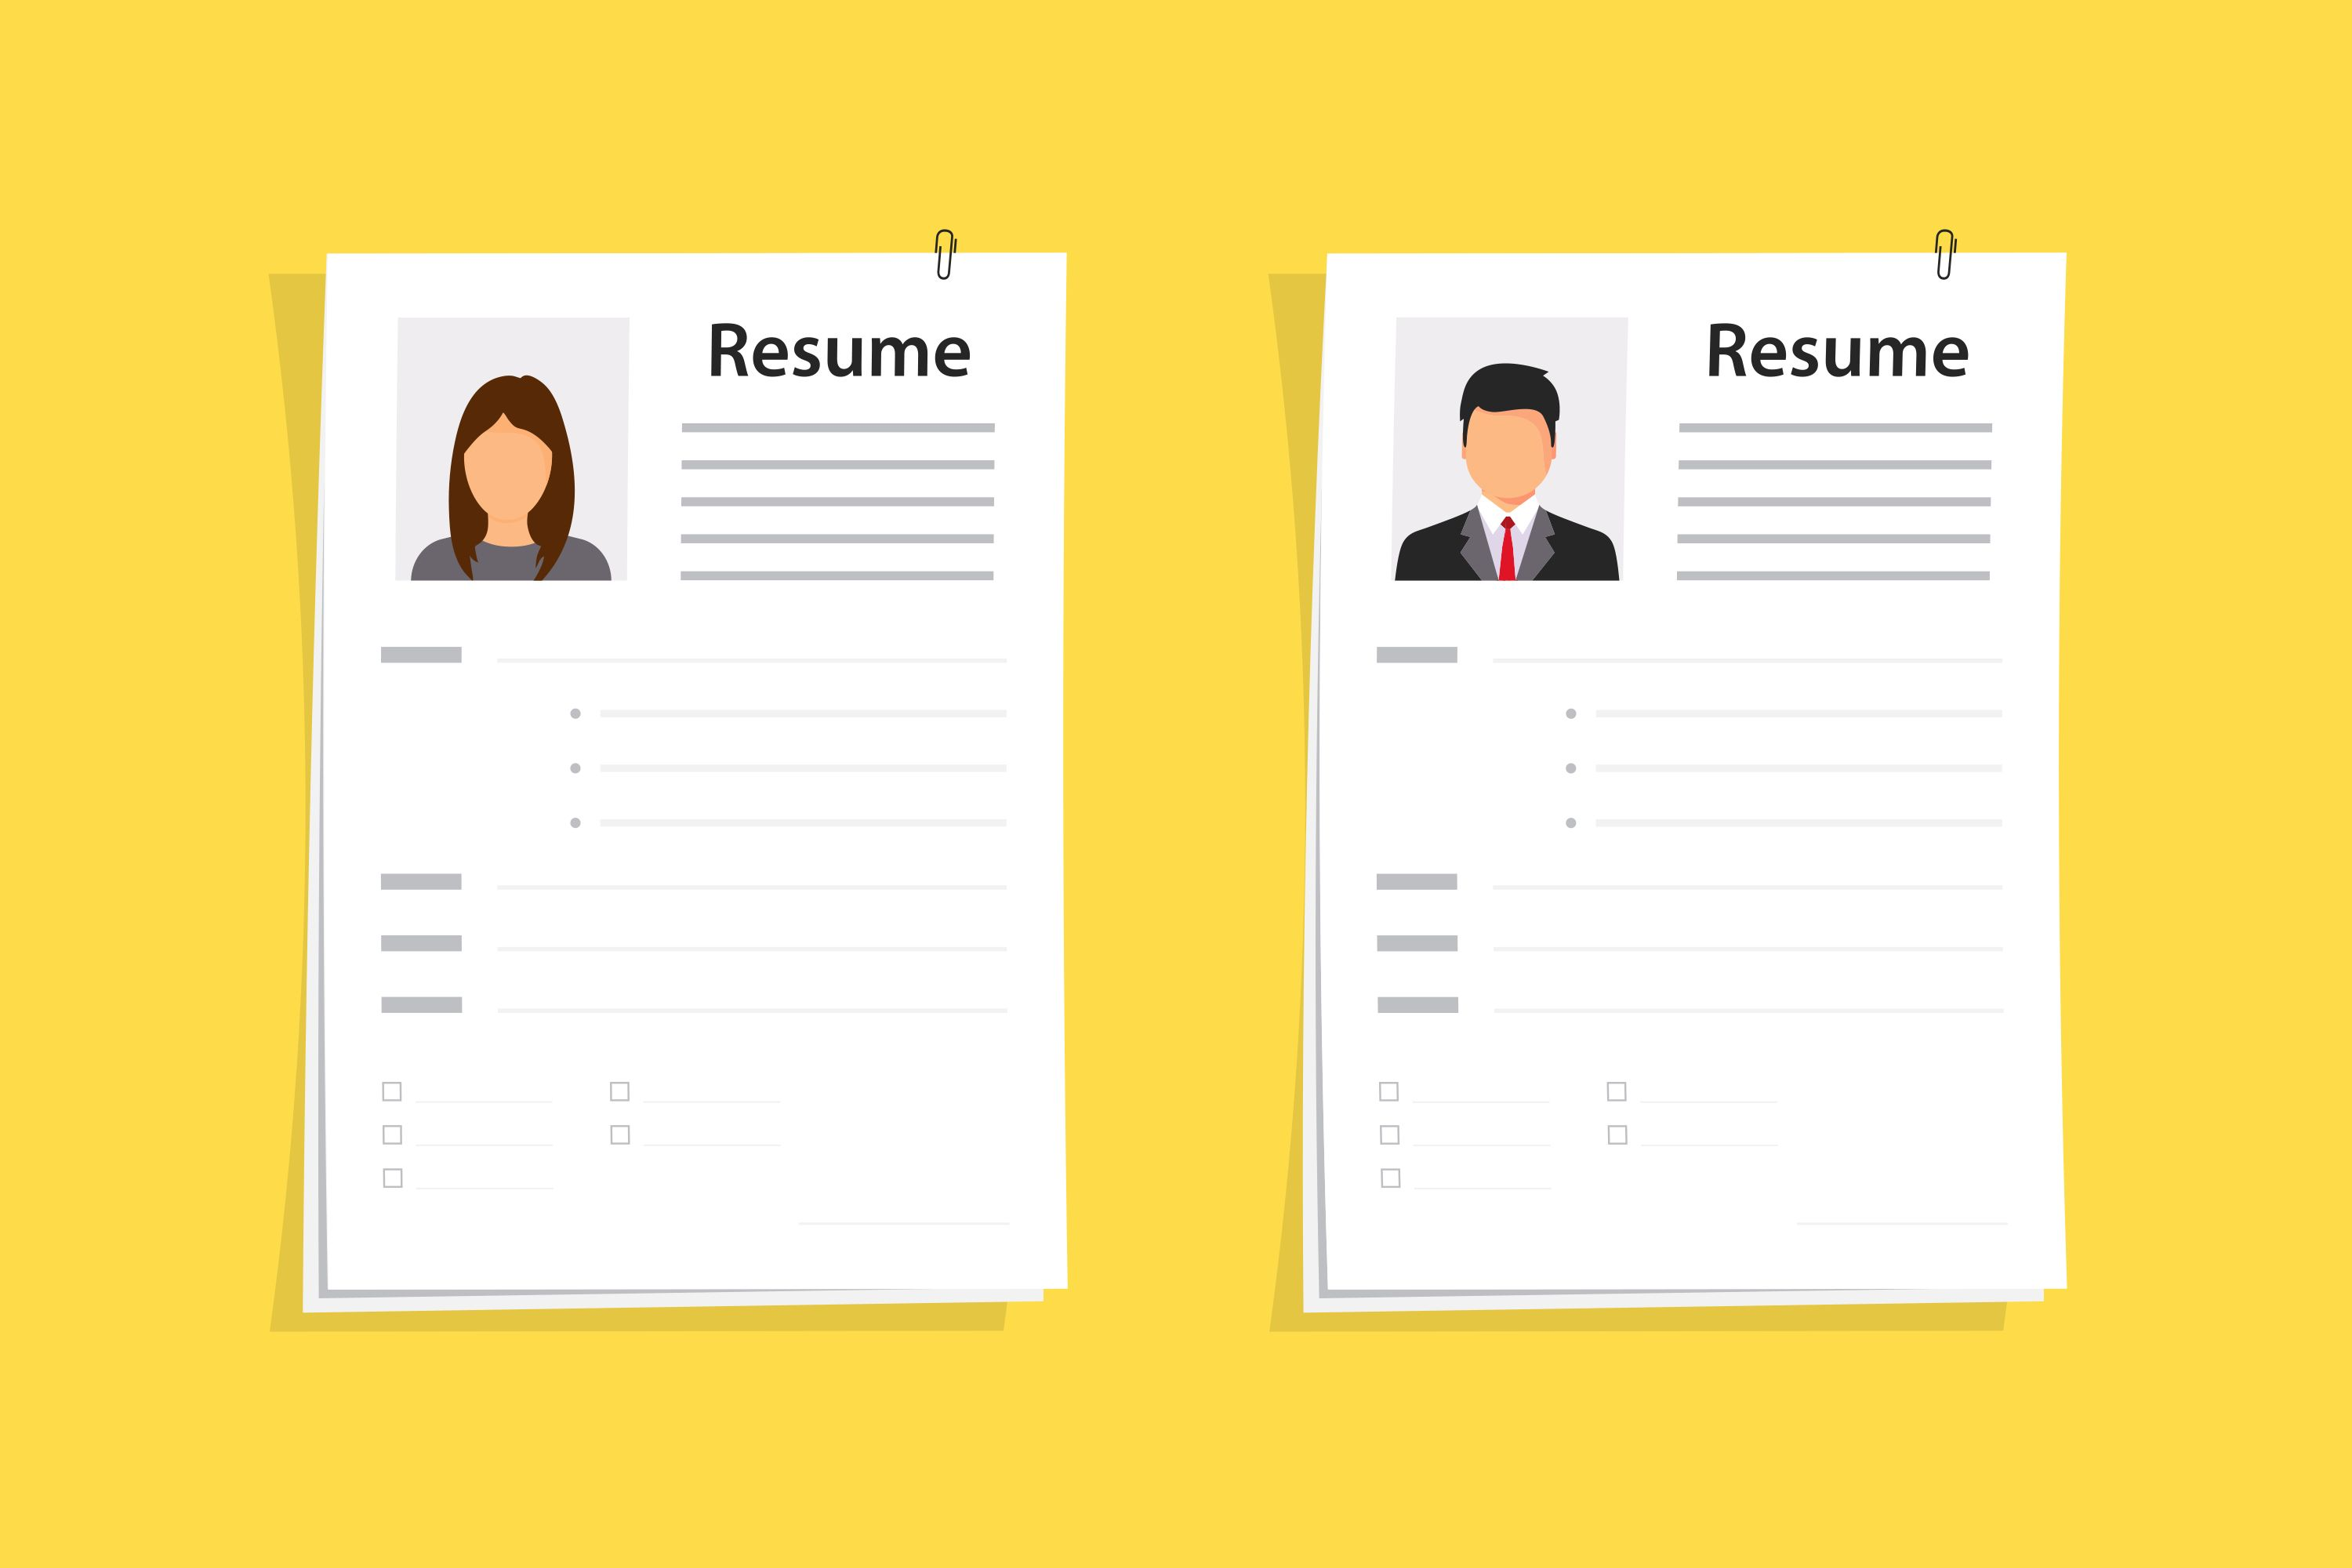 Should You Use Colors In Your Resume? It Depends.